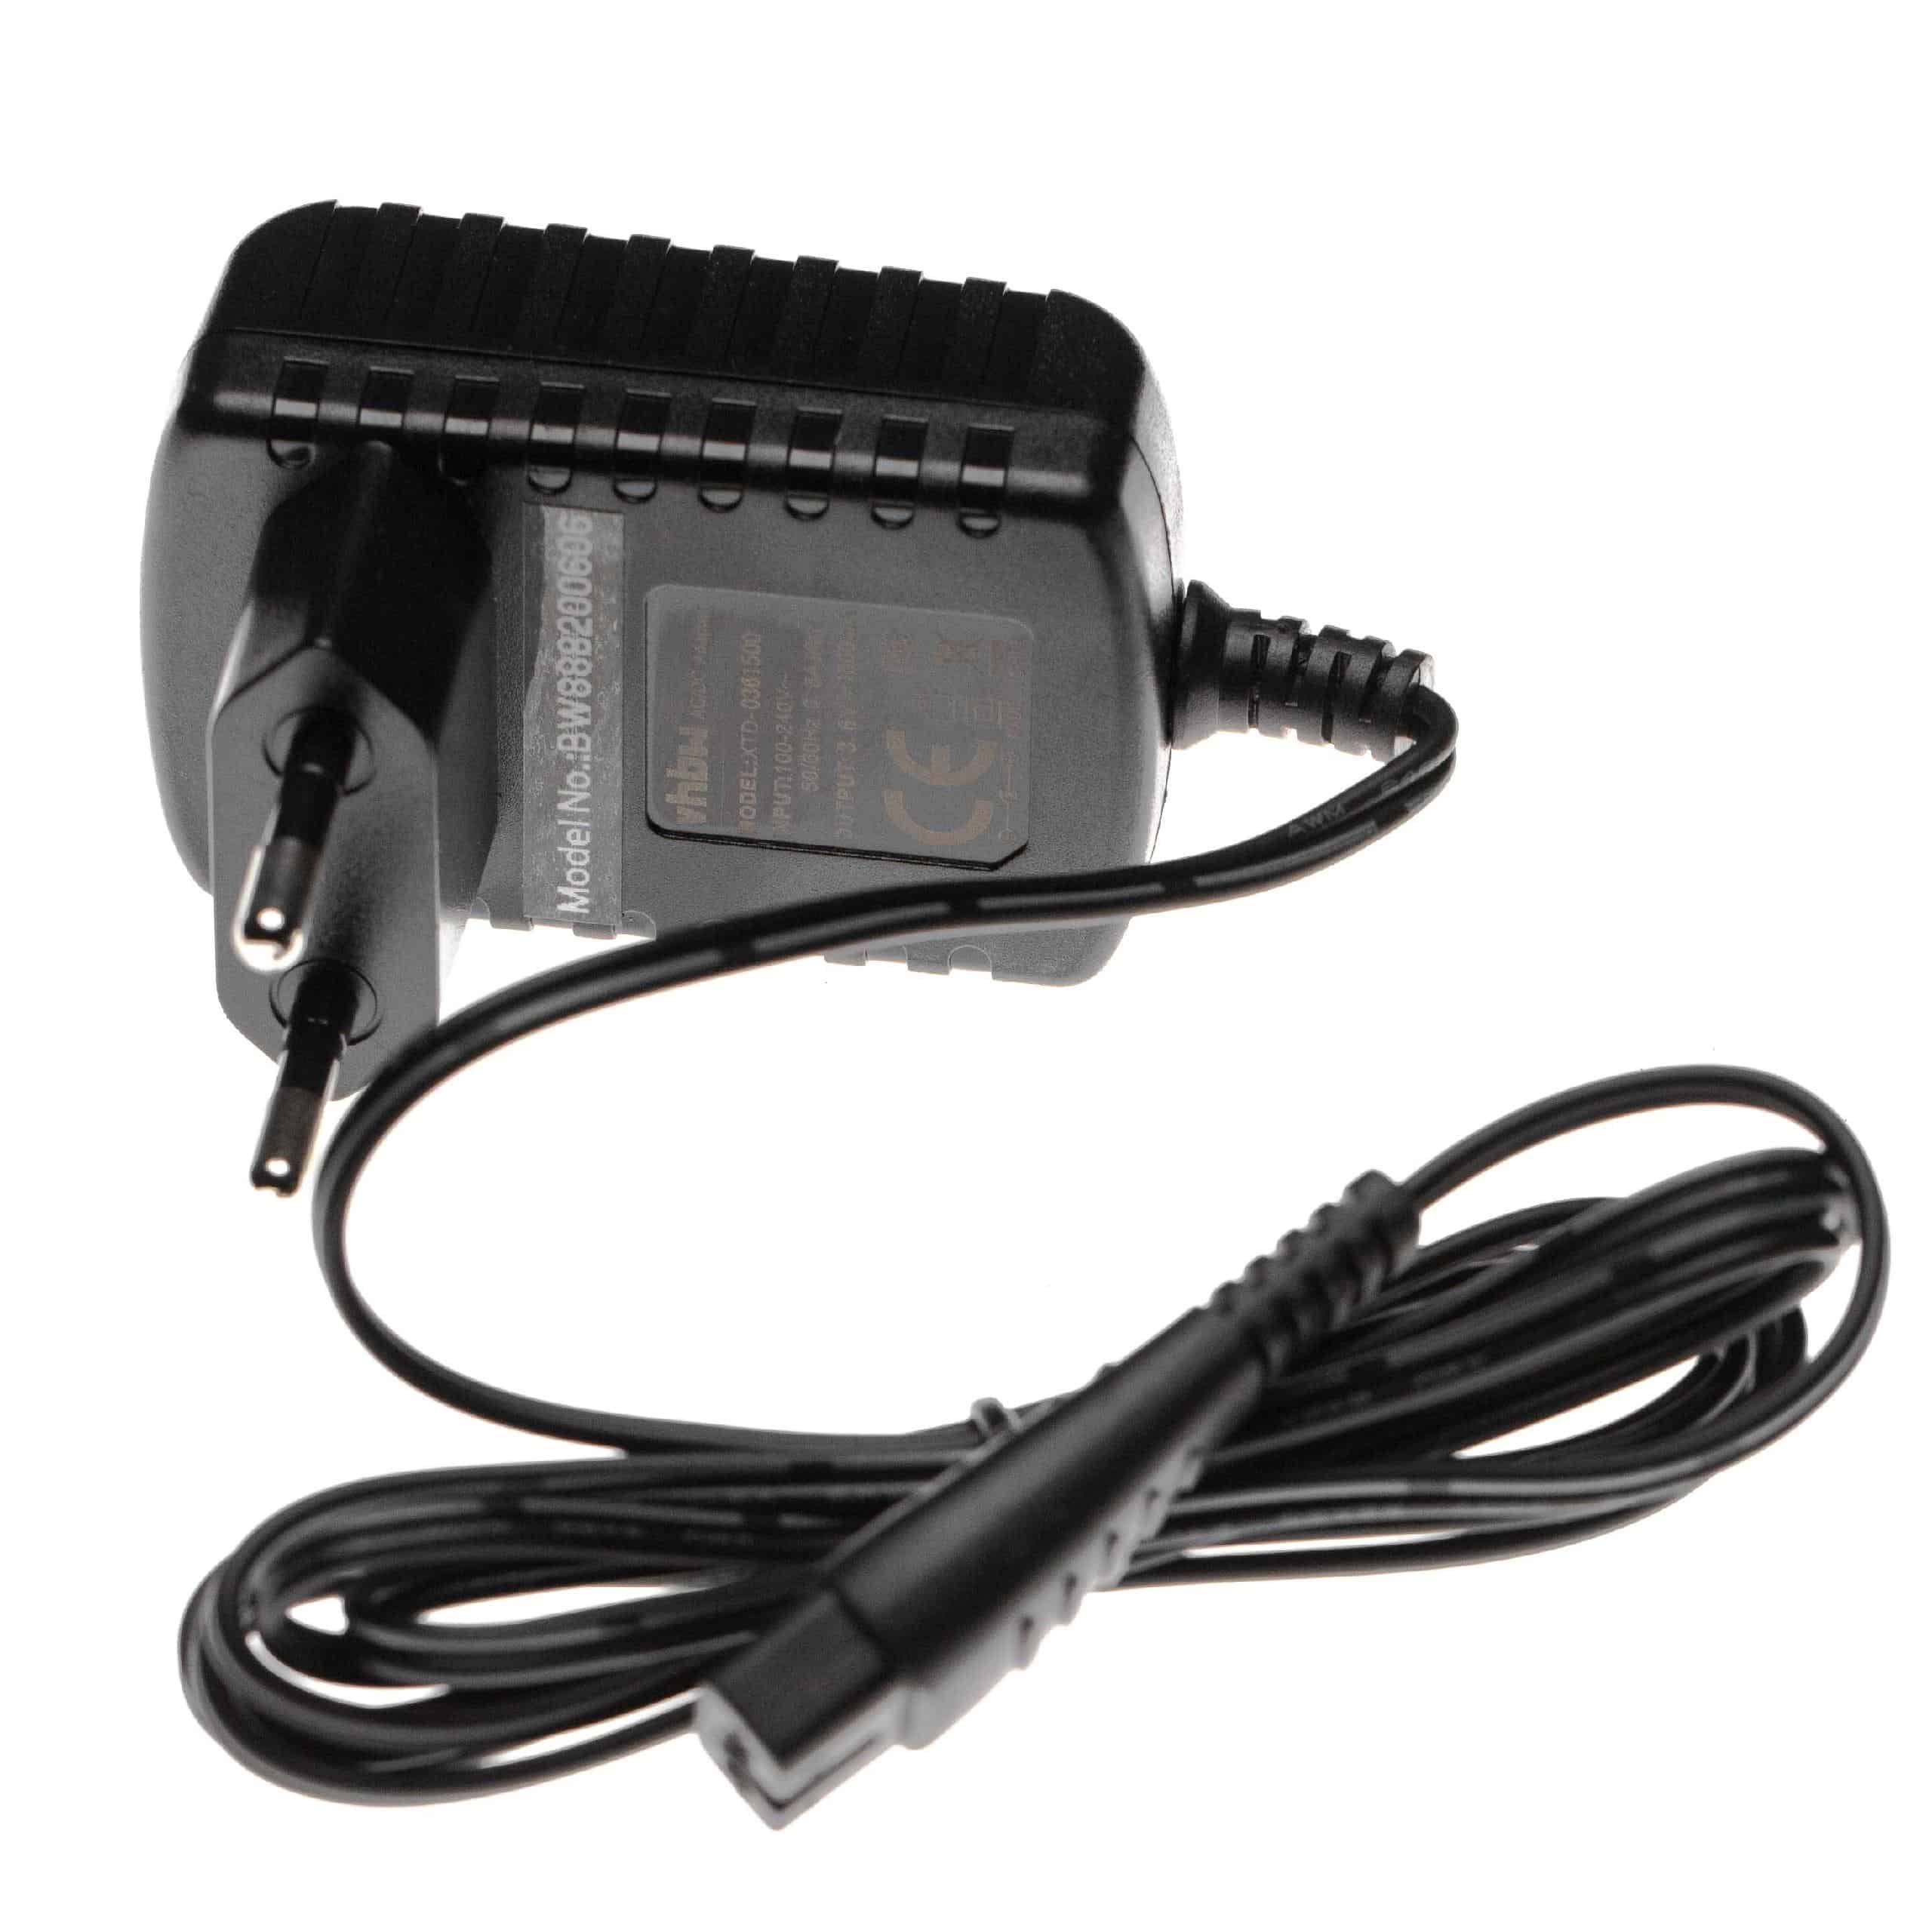 Mains Power Adapter replaces Panasonic RE9-39, WER1611K7P64 for Panasonic Electric Hair Trimmer